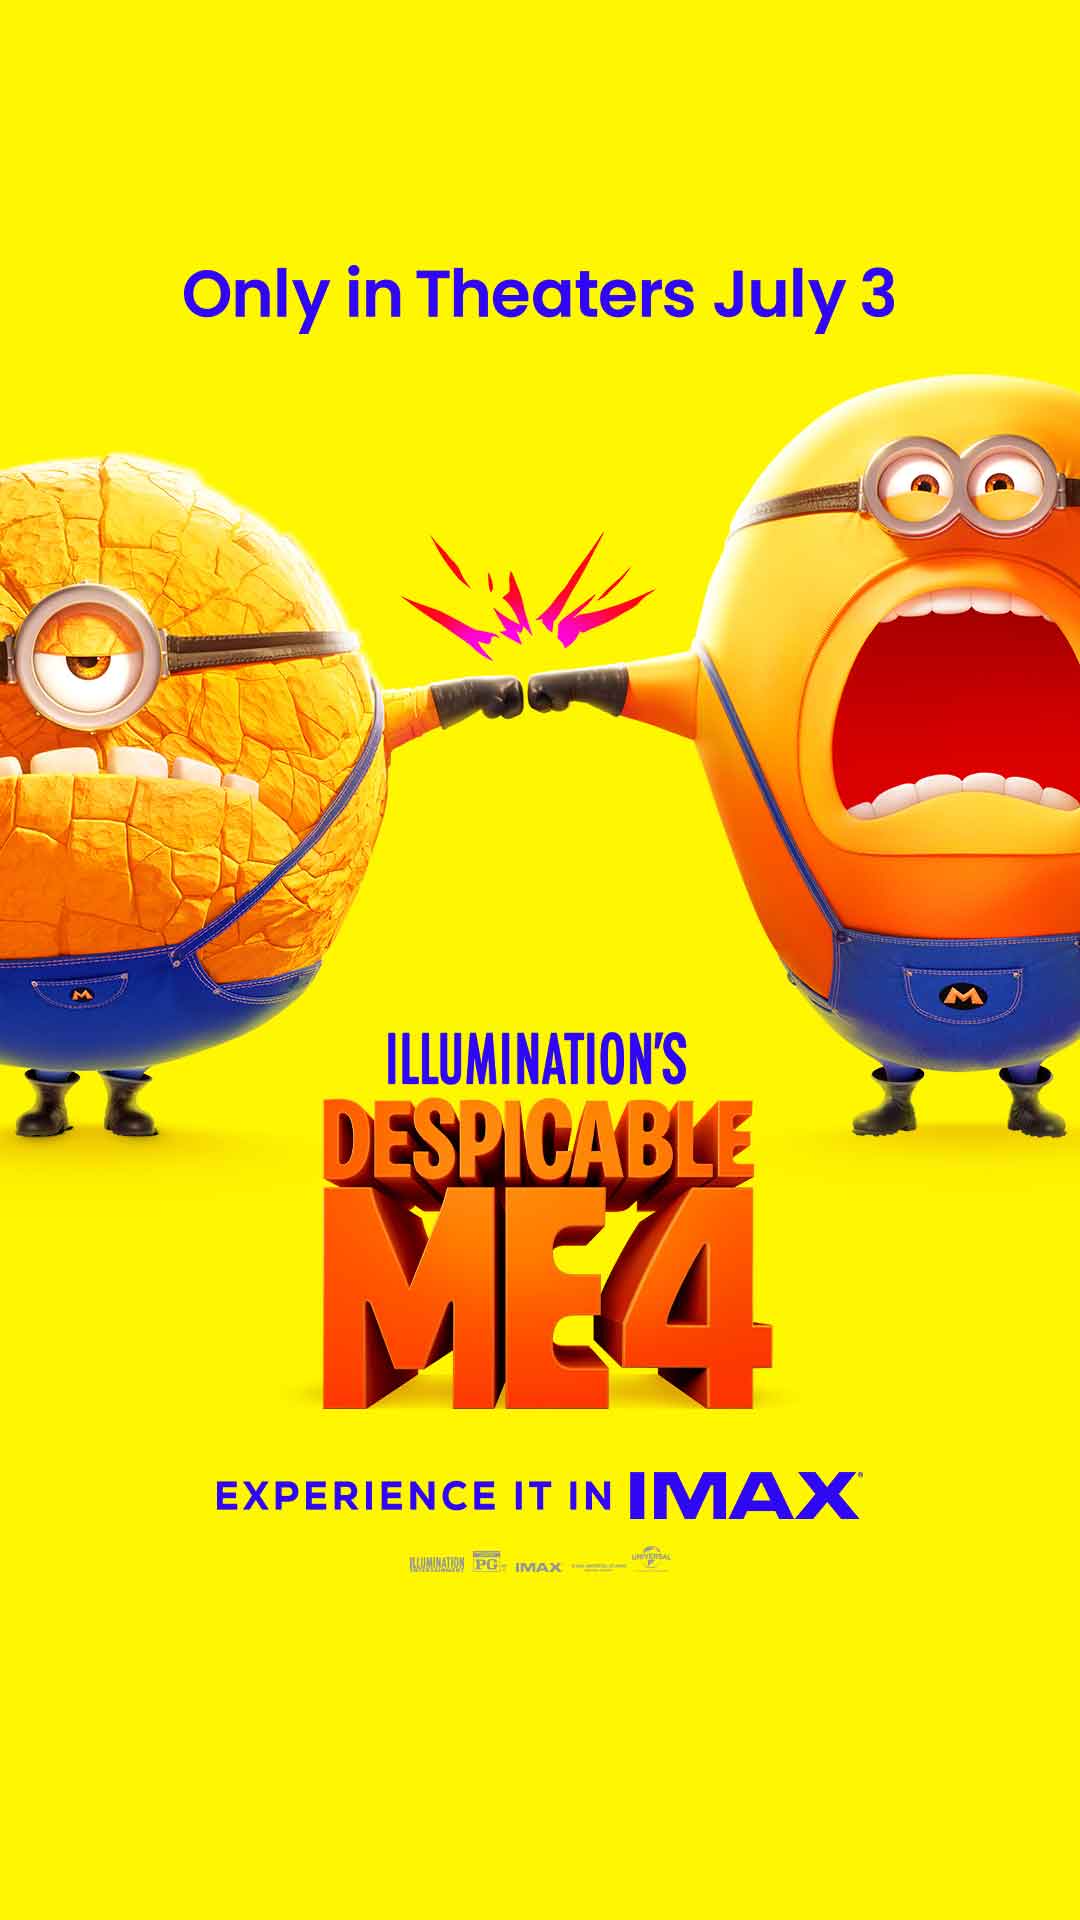 Minions on the poster for Despicable Me 4